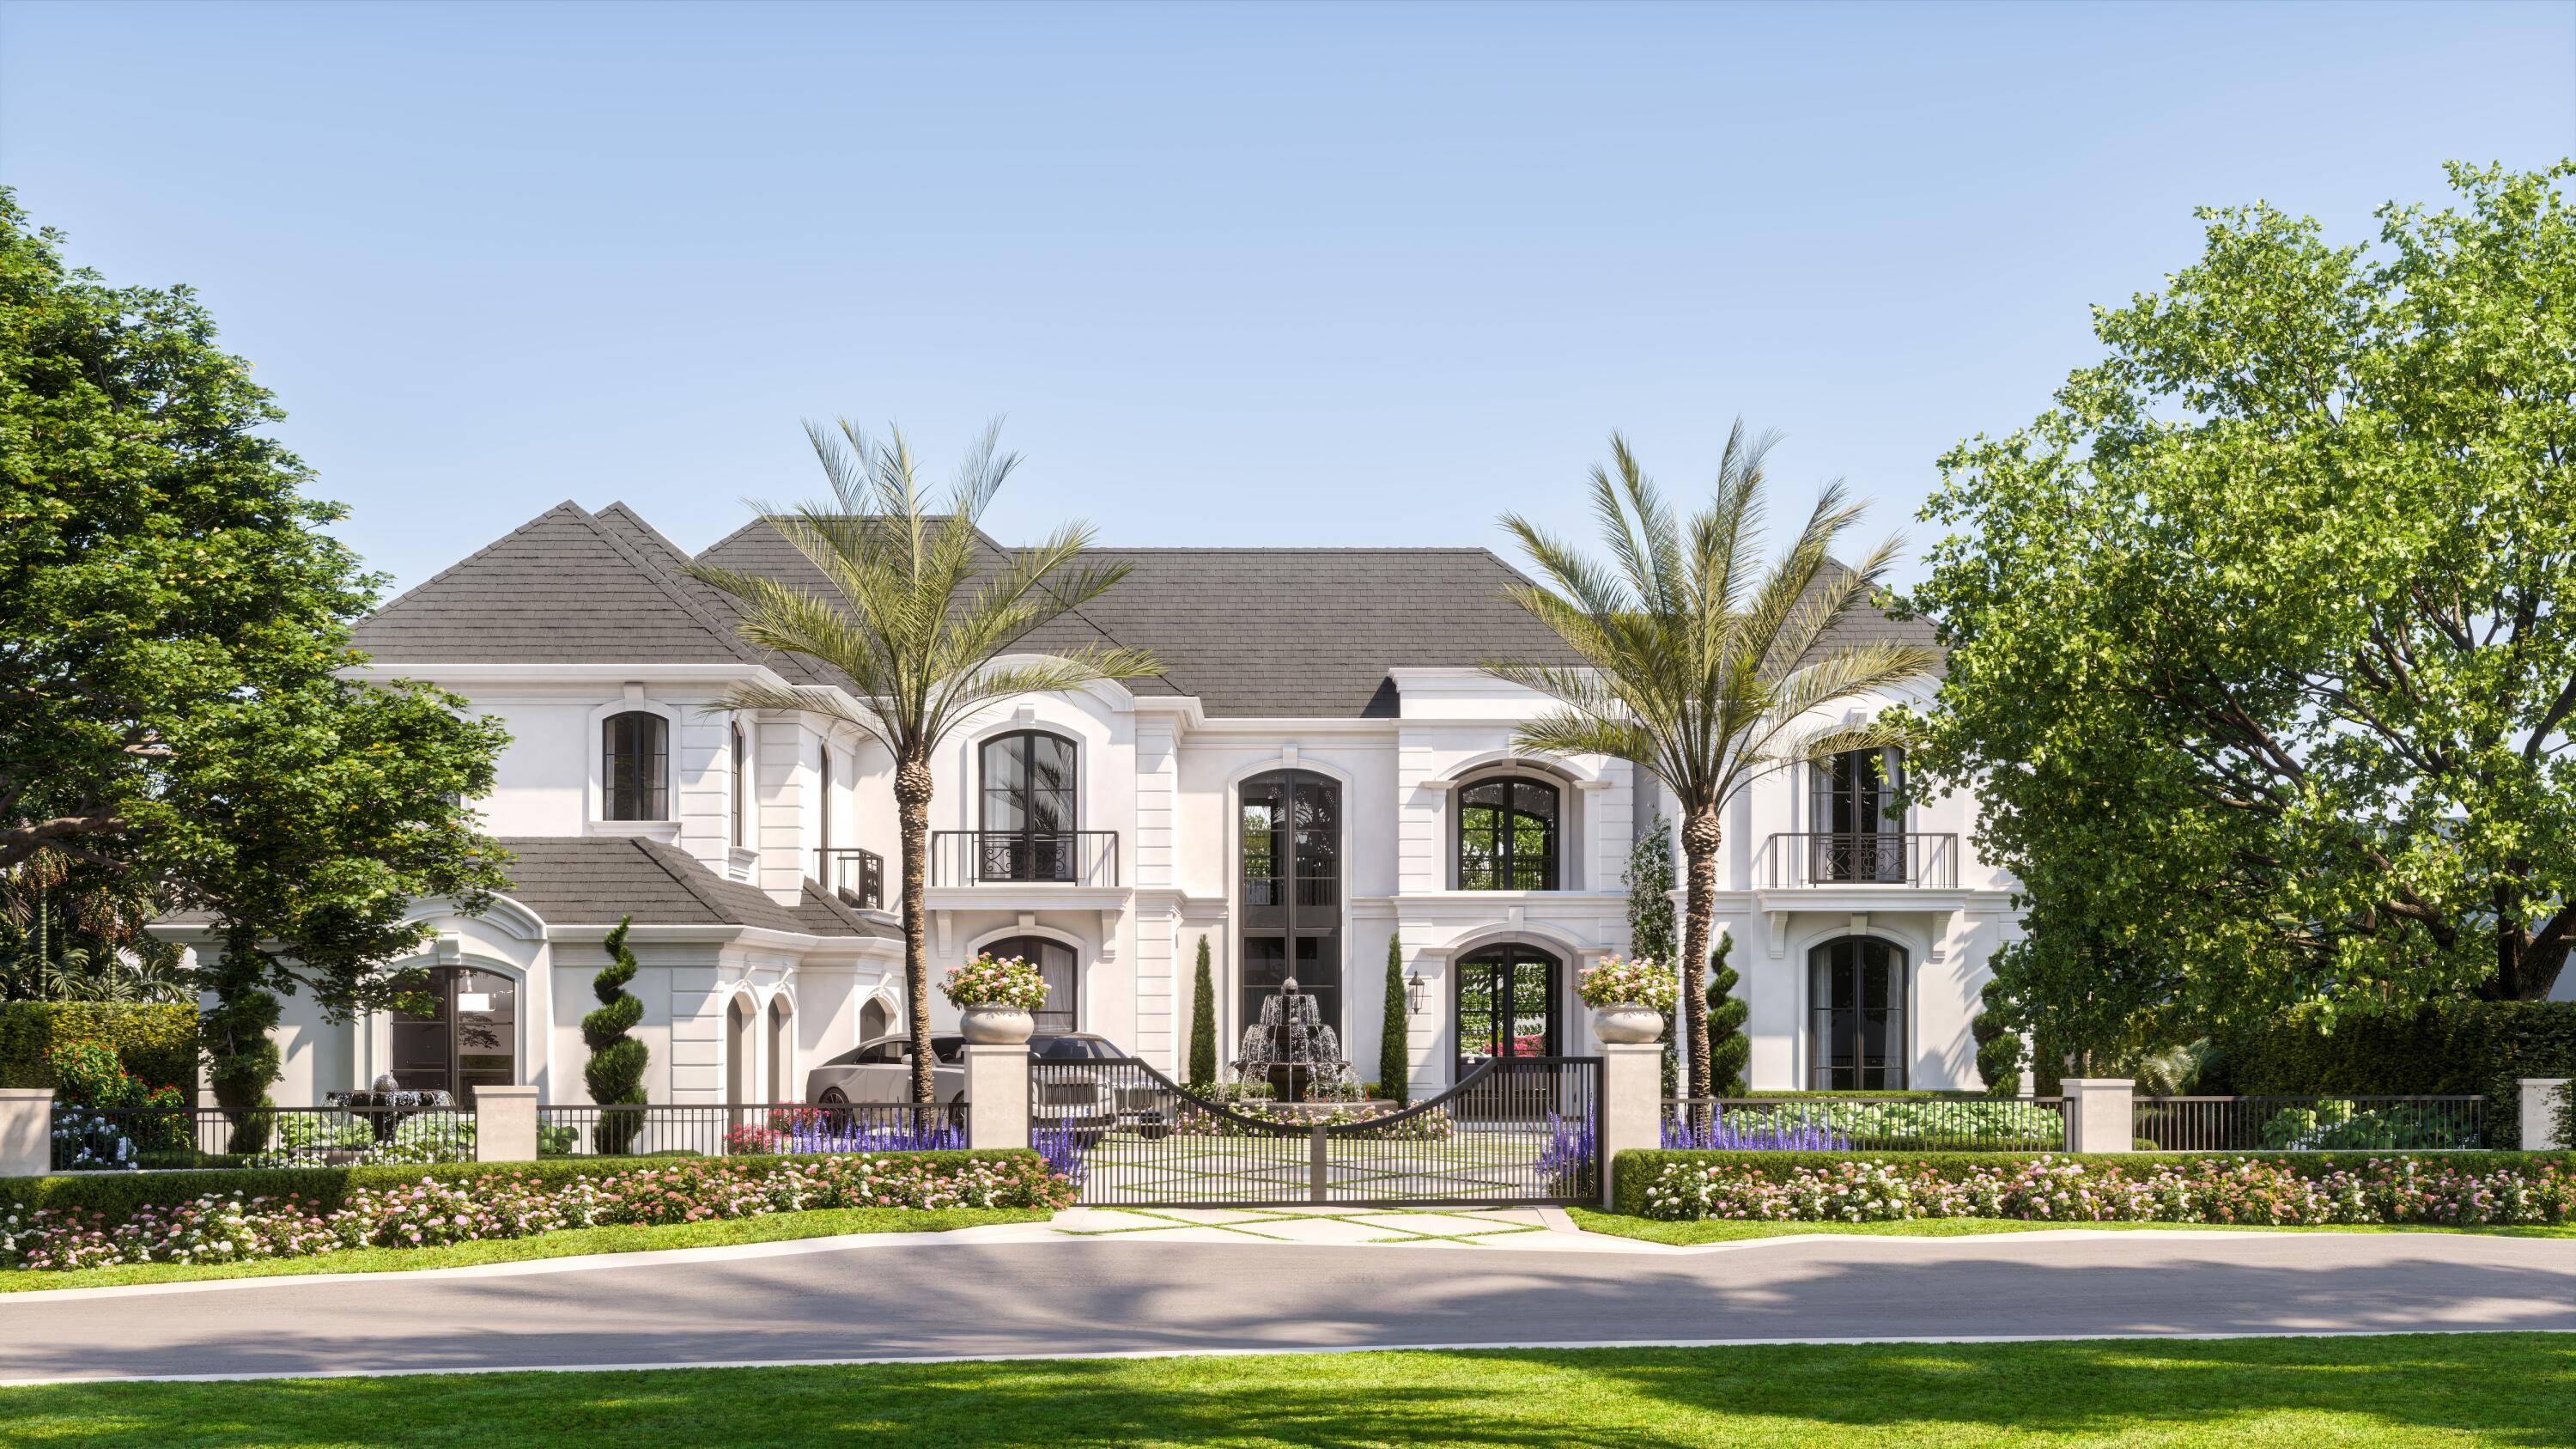 Welcome to your future oasis in the prestigious community of Admirals Cove !